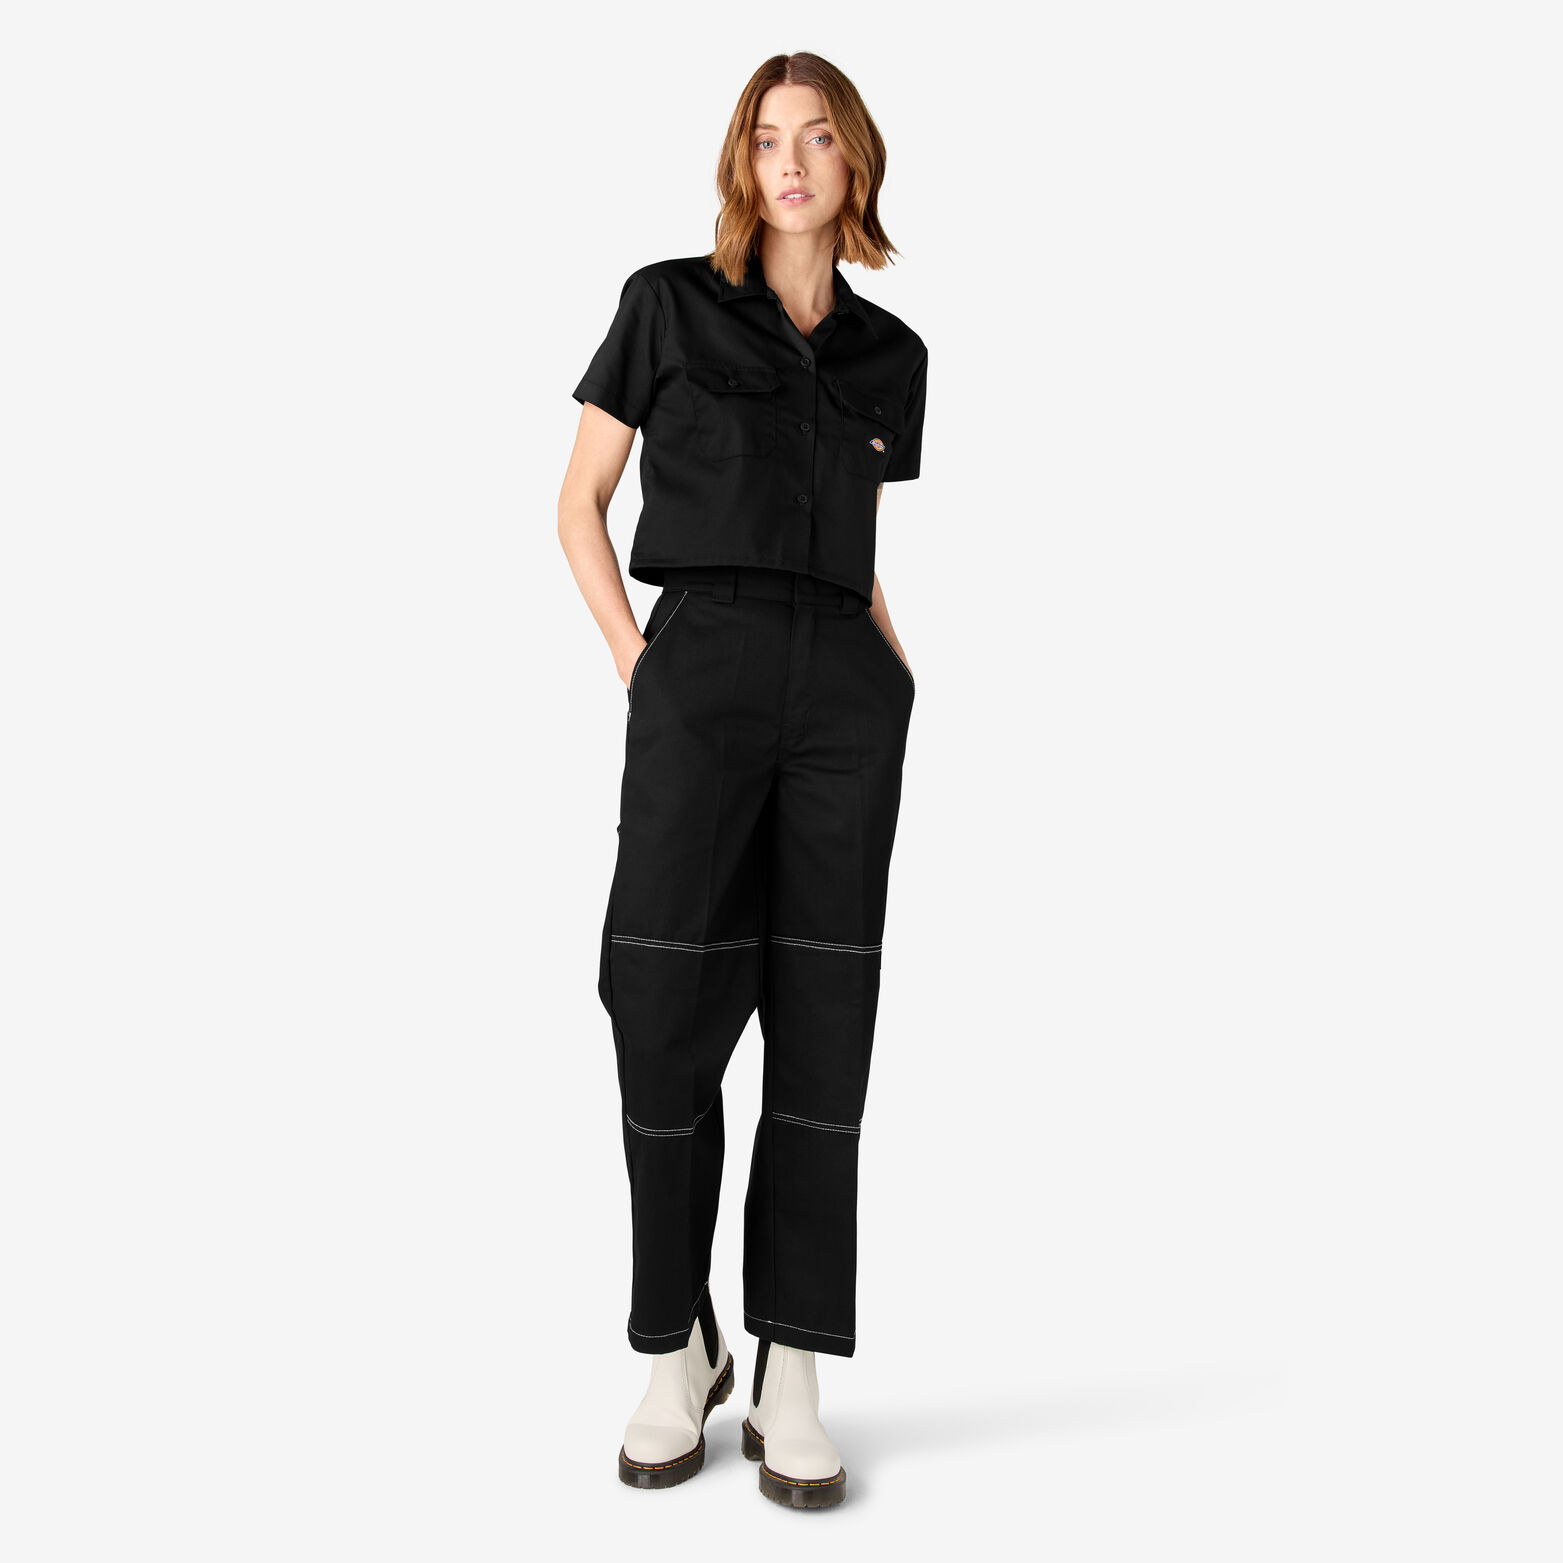 Women’s Relaxed Fit Double Knee Pants - Dickies US